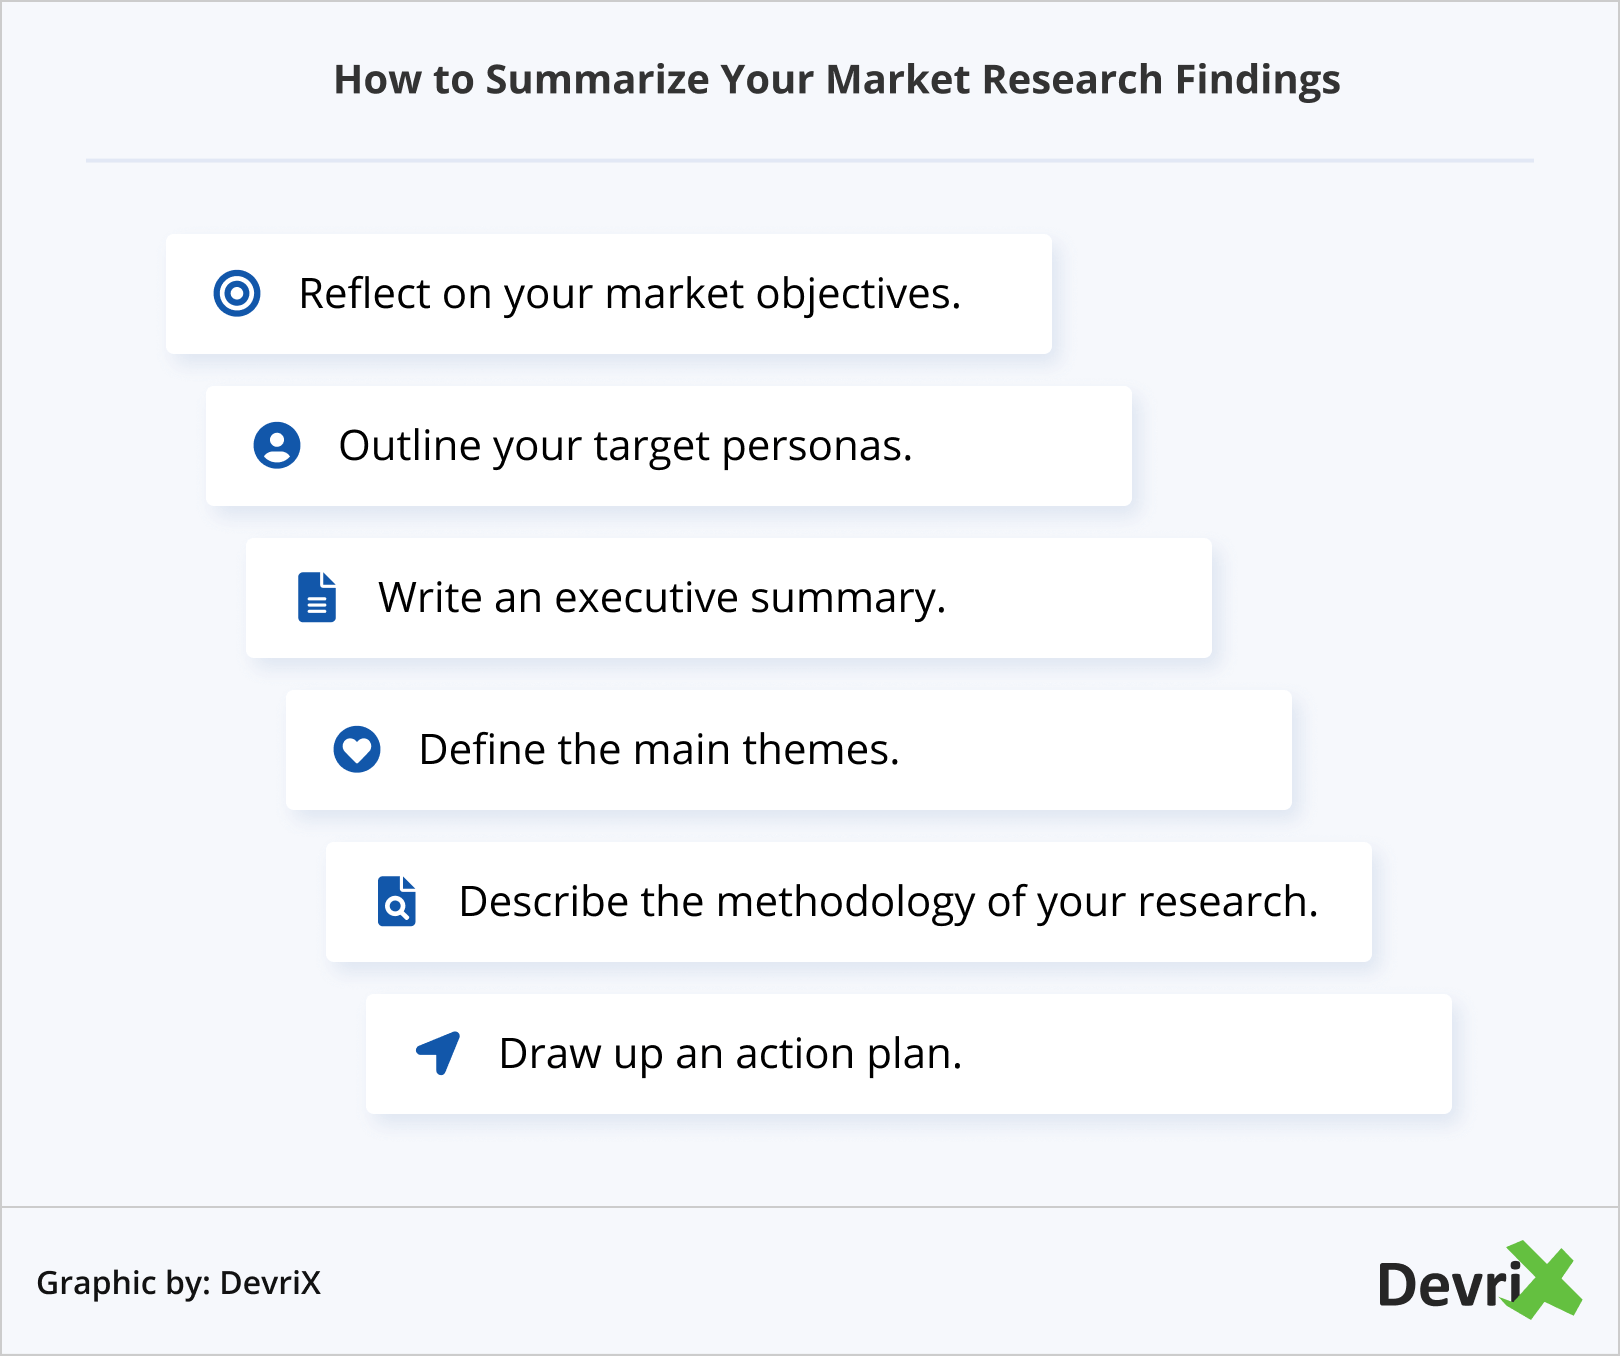 How to Summarize Your Market Research Findings